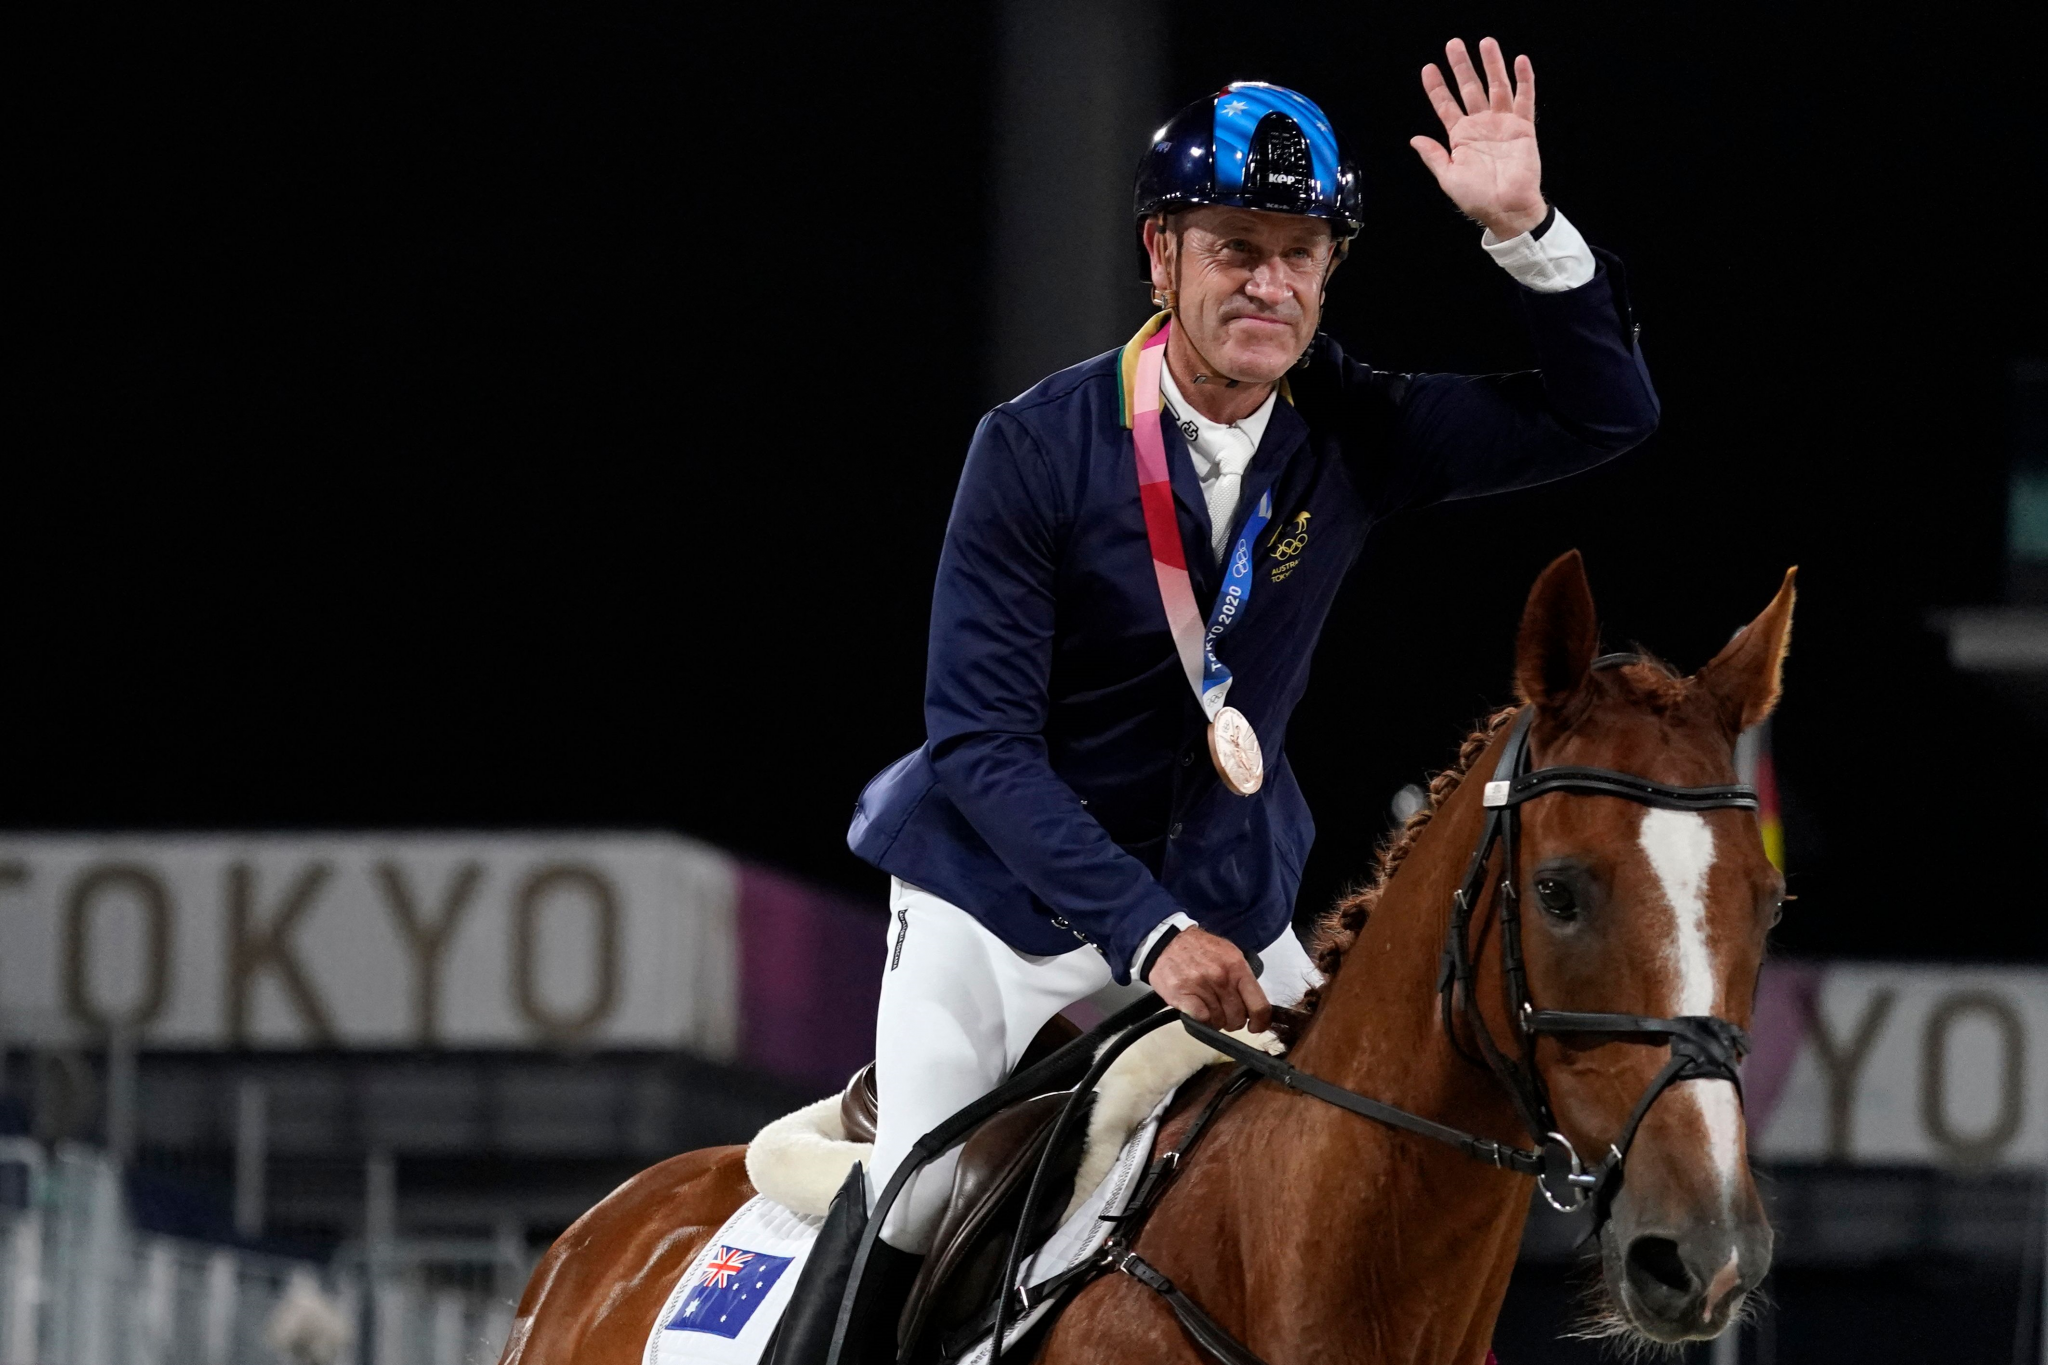 Andrew Hoy won a bronze medal in the individual eventing event at Tokyo 2020, as well as a silver as part of Australia's squad in the team competition ©Getty Images